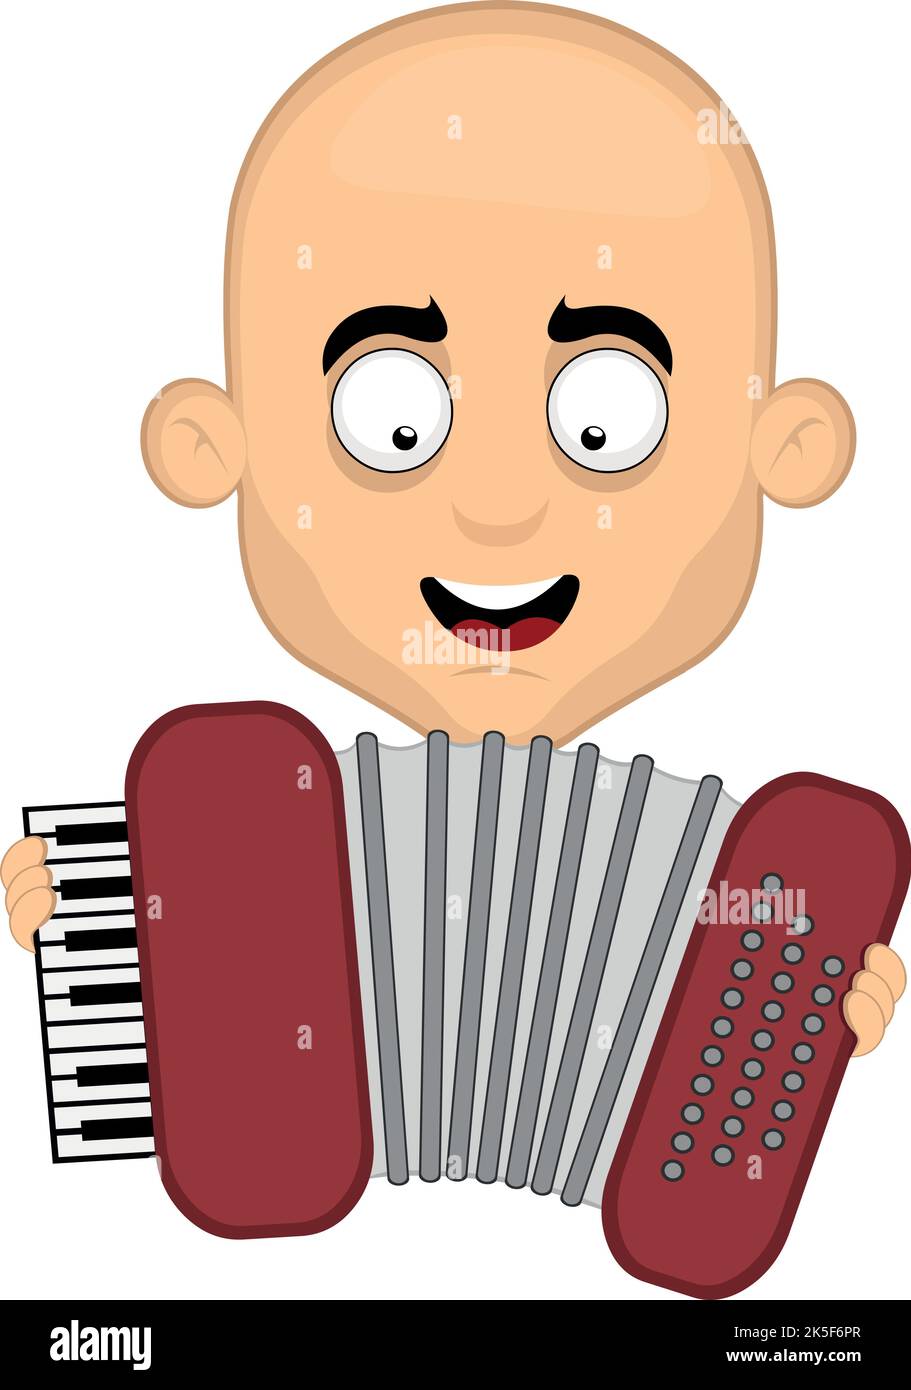 Vector illustration of the face of a bald man cartoon playing musical instrument accordion Stock Vector